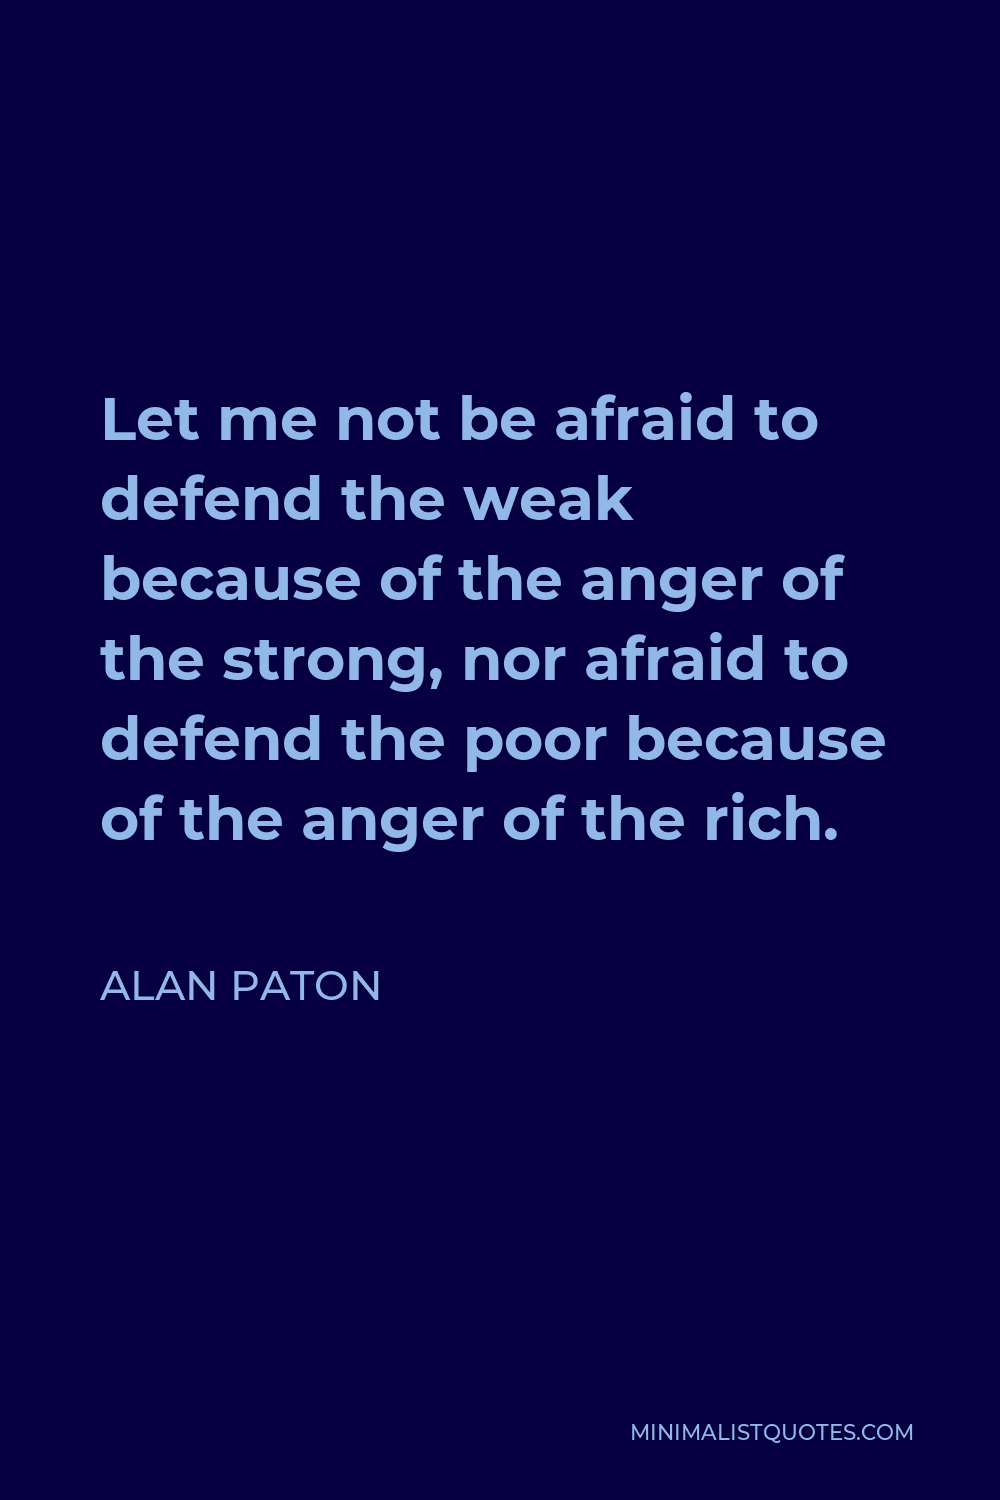 Alan Paton Quote - Let me not be afraid to defend the weak because of the anger of the strong, nor afraid to defend the poor because of the anger of the rich.